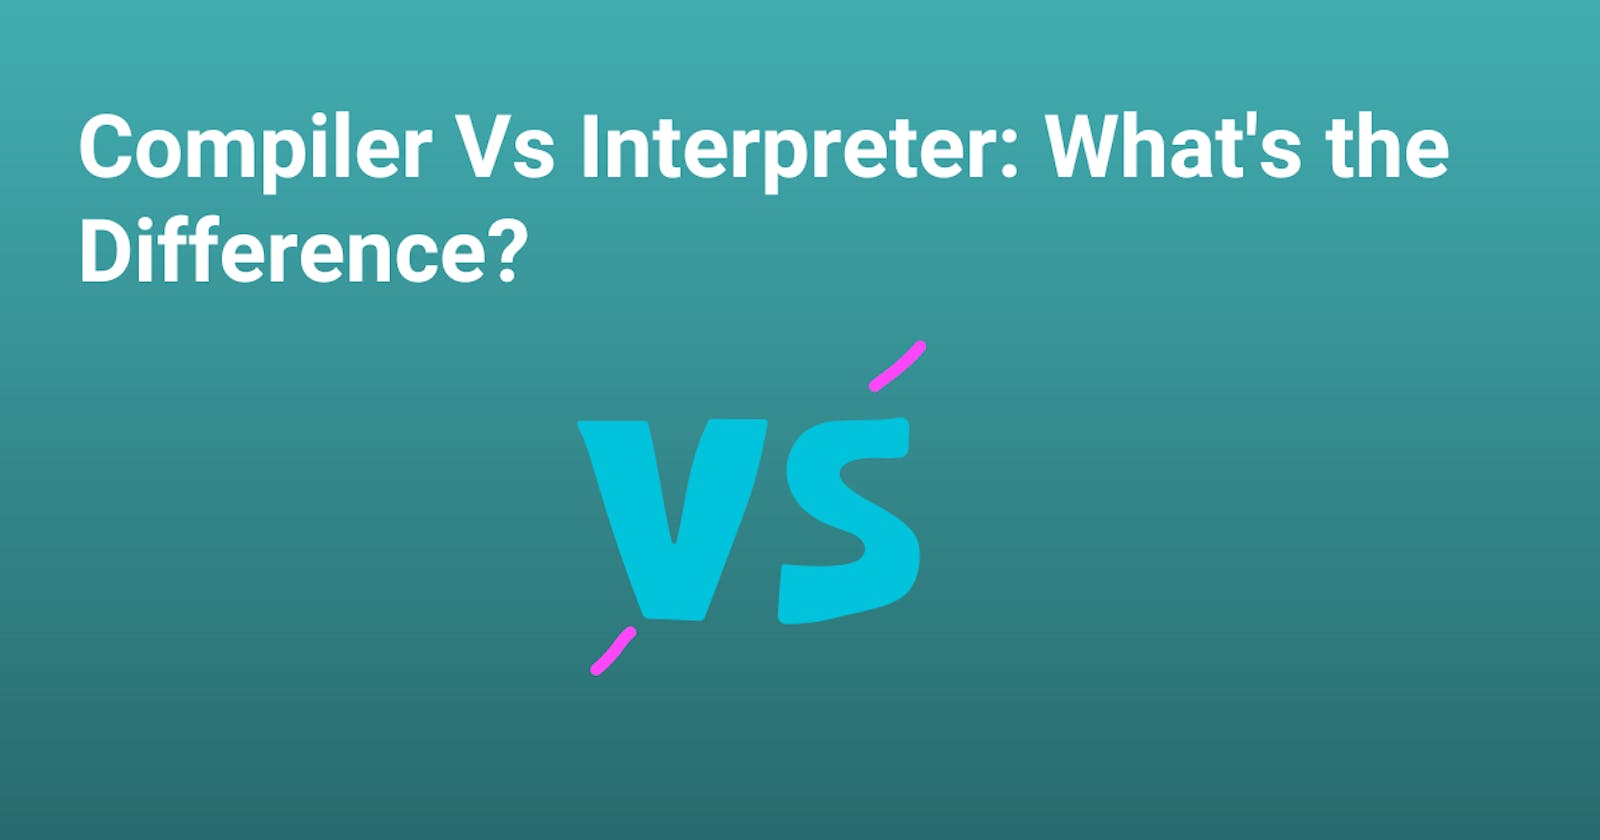 Compiler Vs Interpreter: What's the Difference?